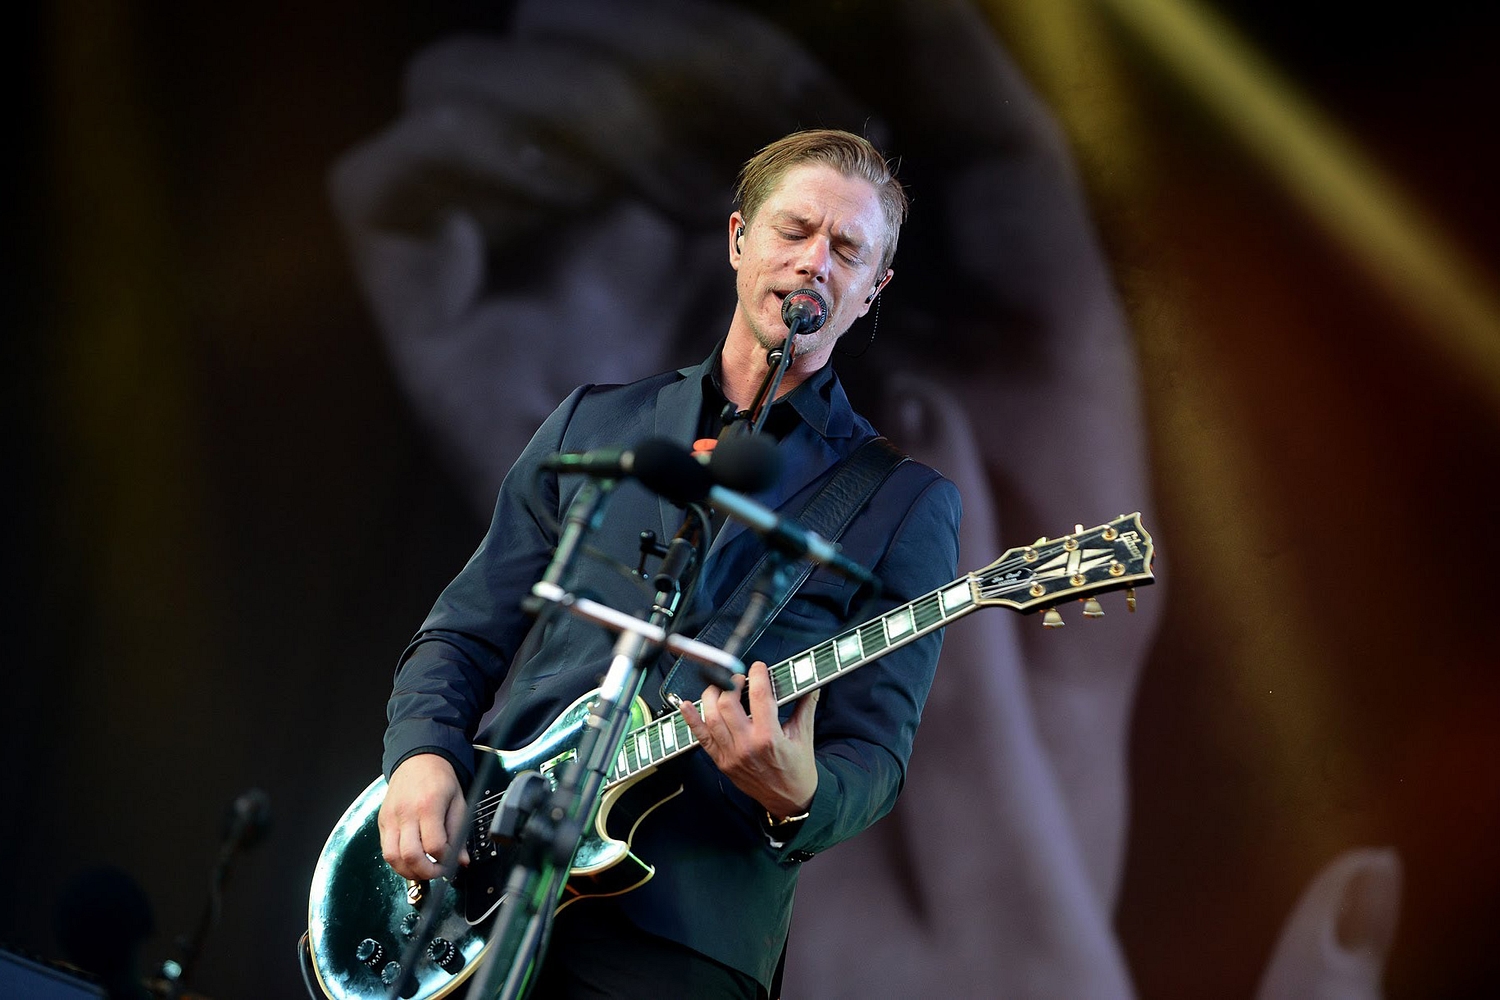 Watch Interpol bring ‘Anywhere’ to the Glastonbury stage